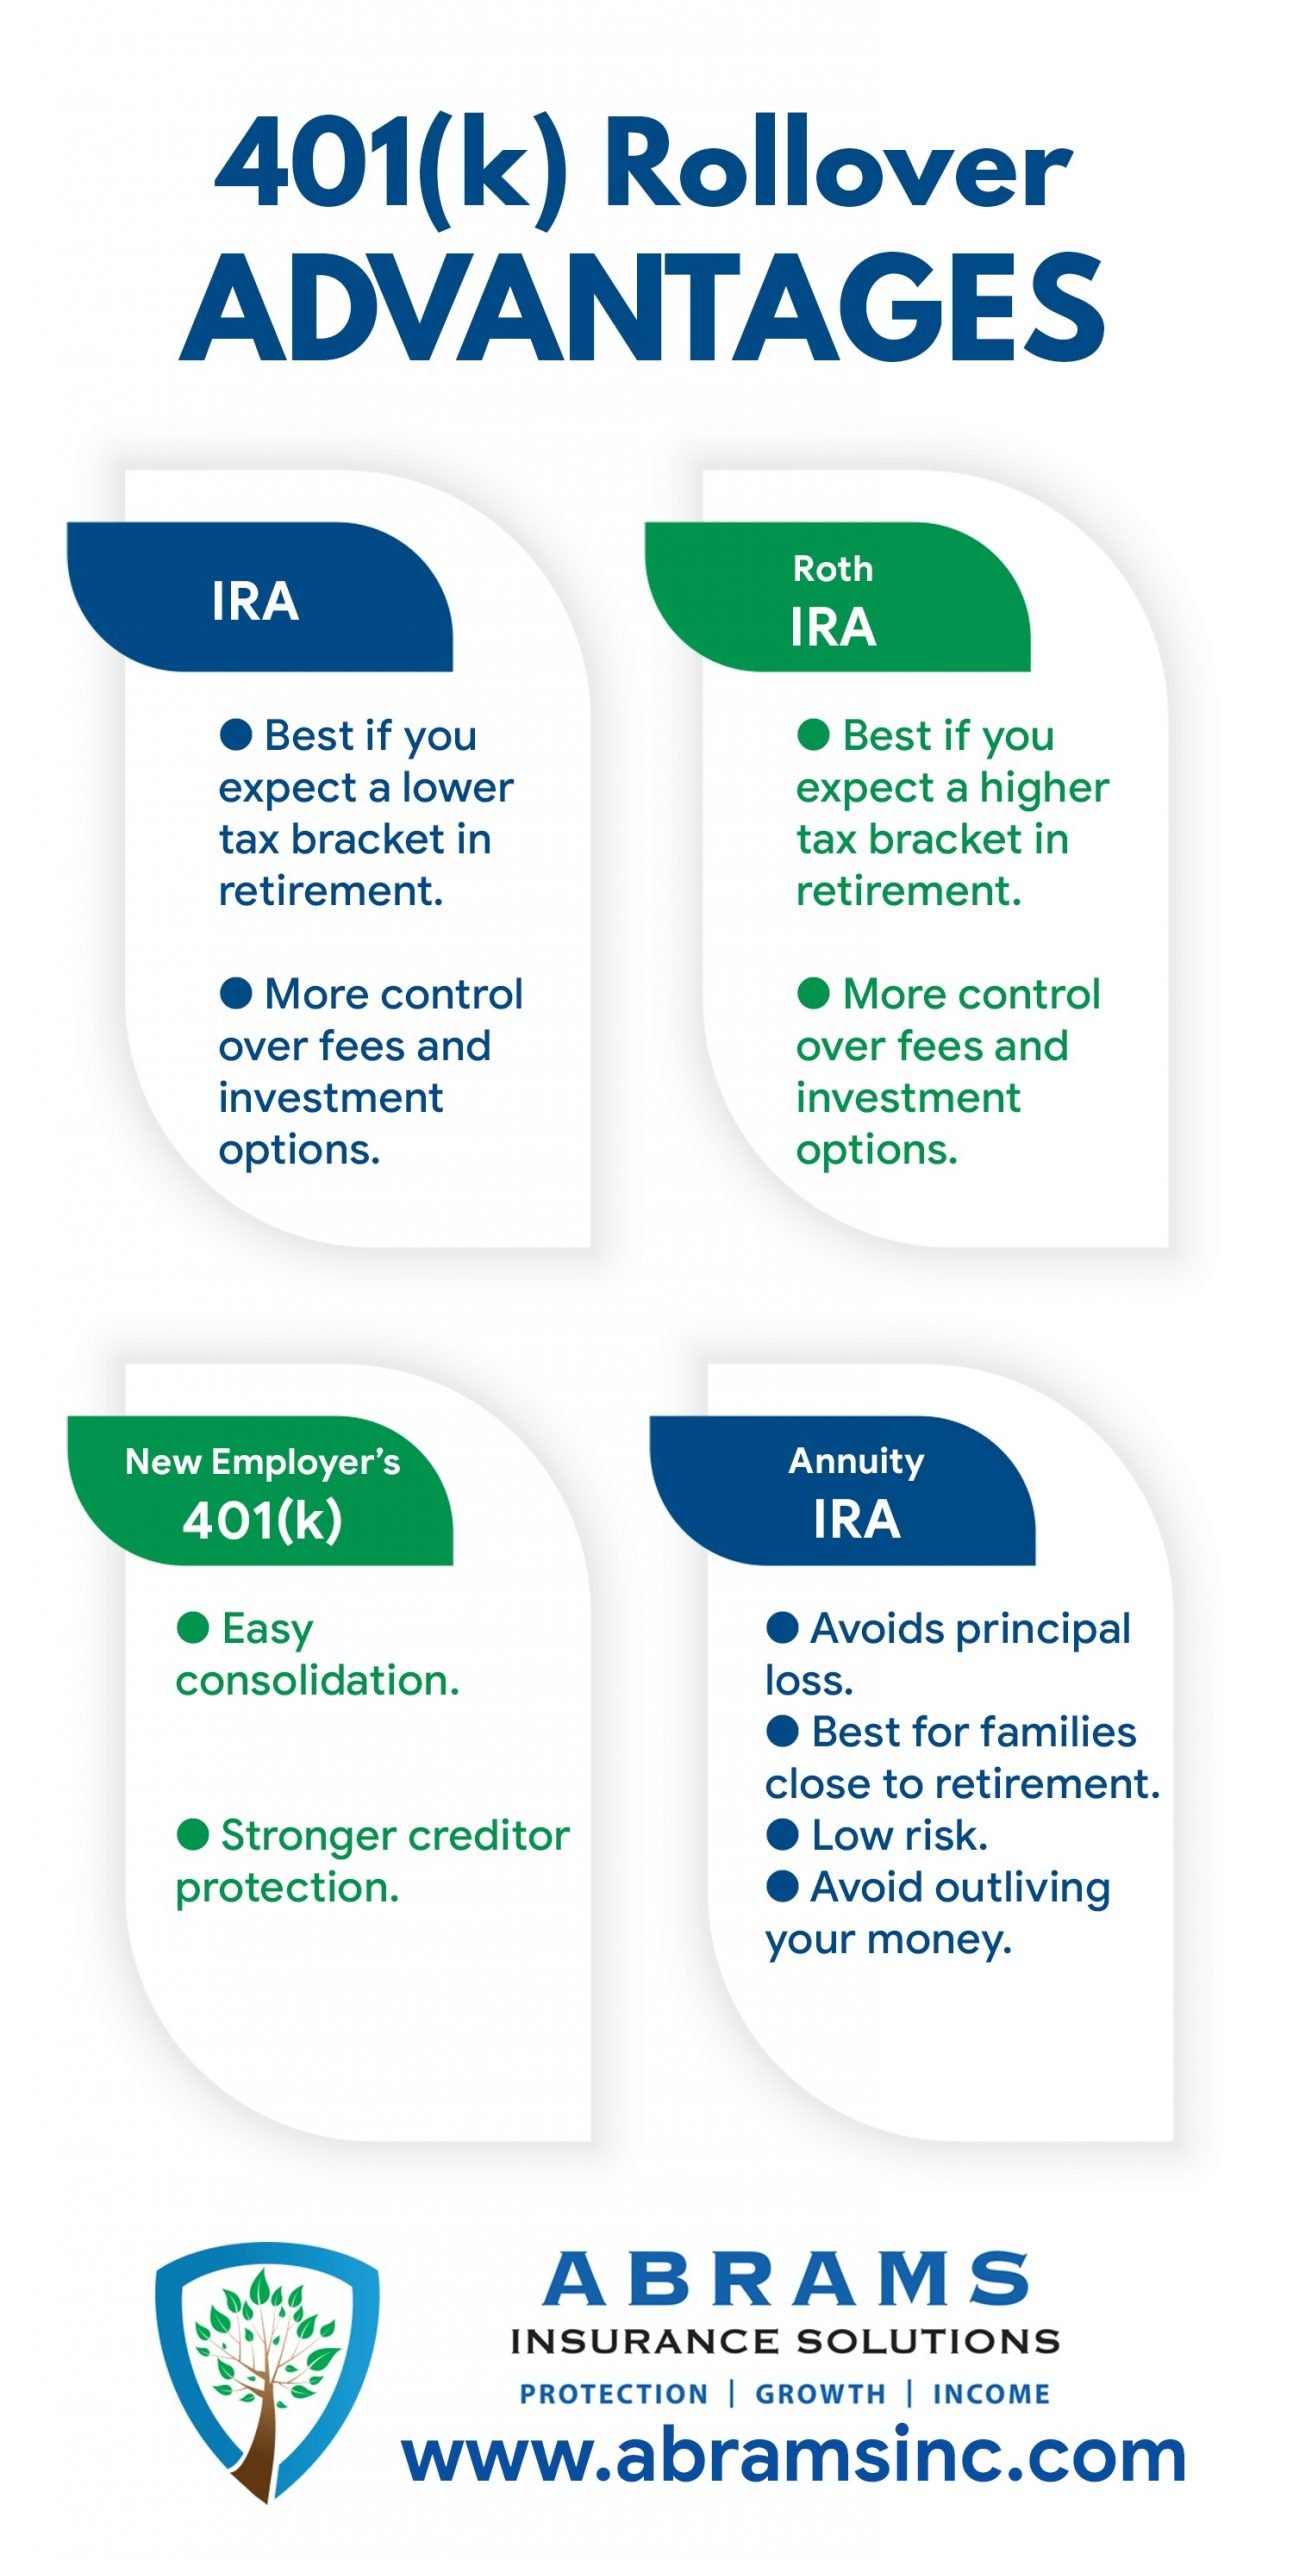 Maximize Your Retirement with a 401(k) Rollover